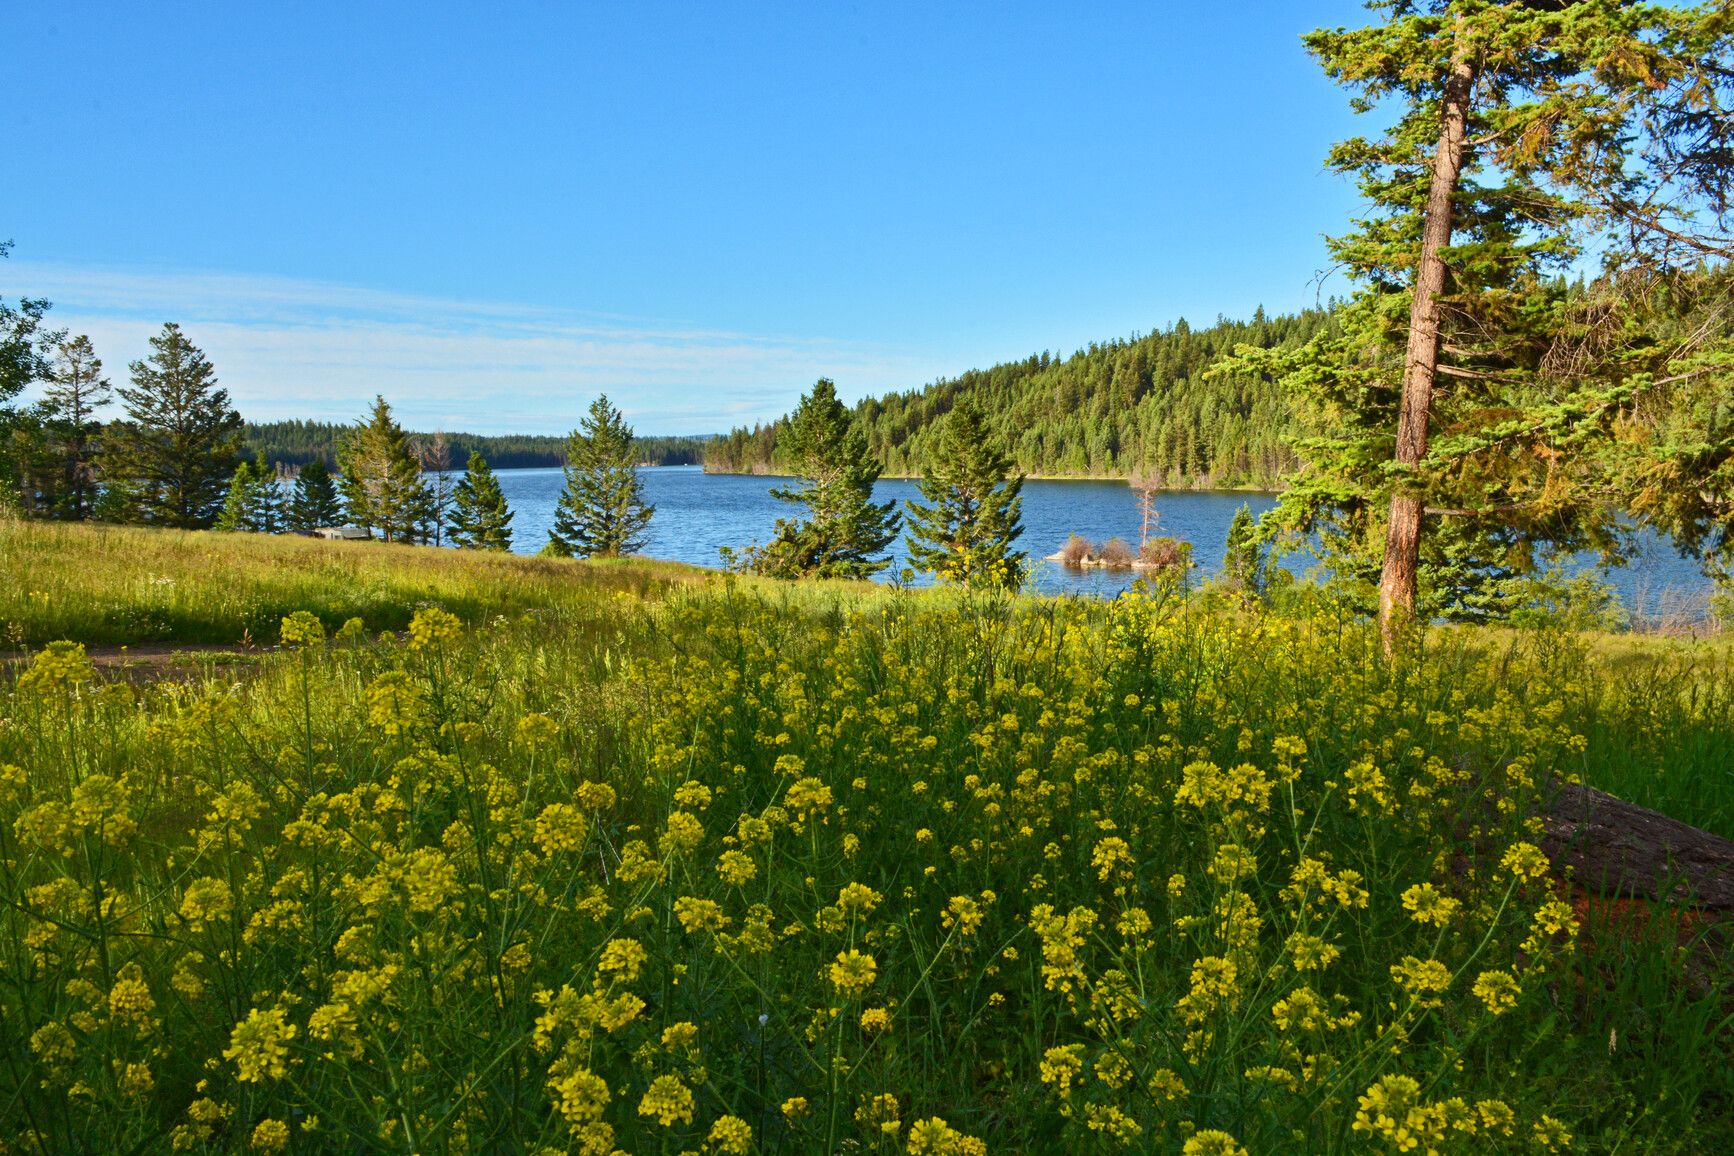 A meadow of field mustard (Brassica rapa) with the backdrop of the forest surrounding the lake. Roche Lake Park.